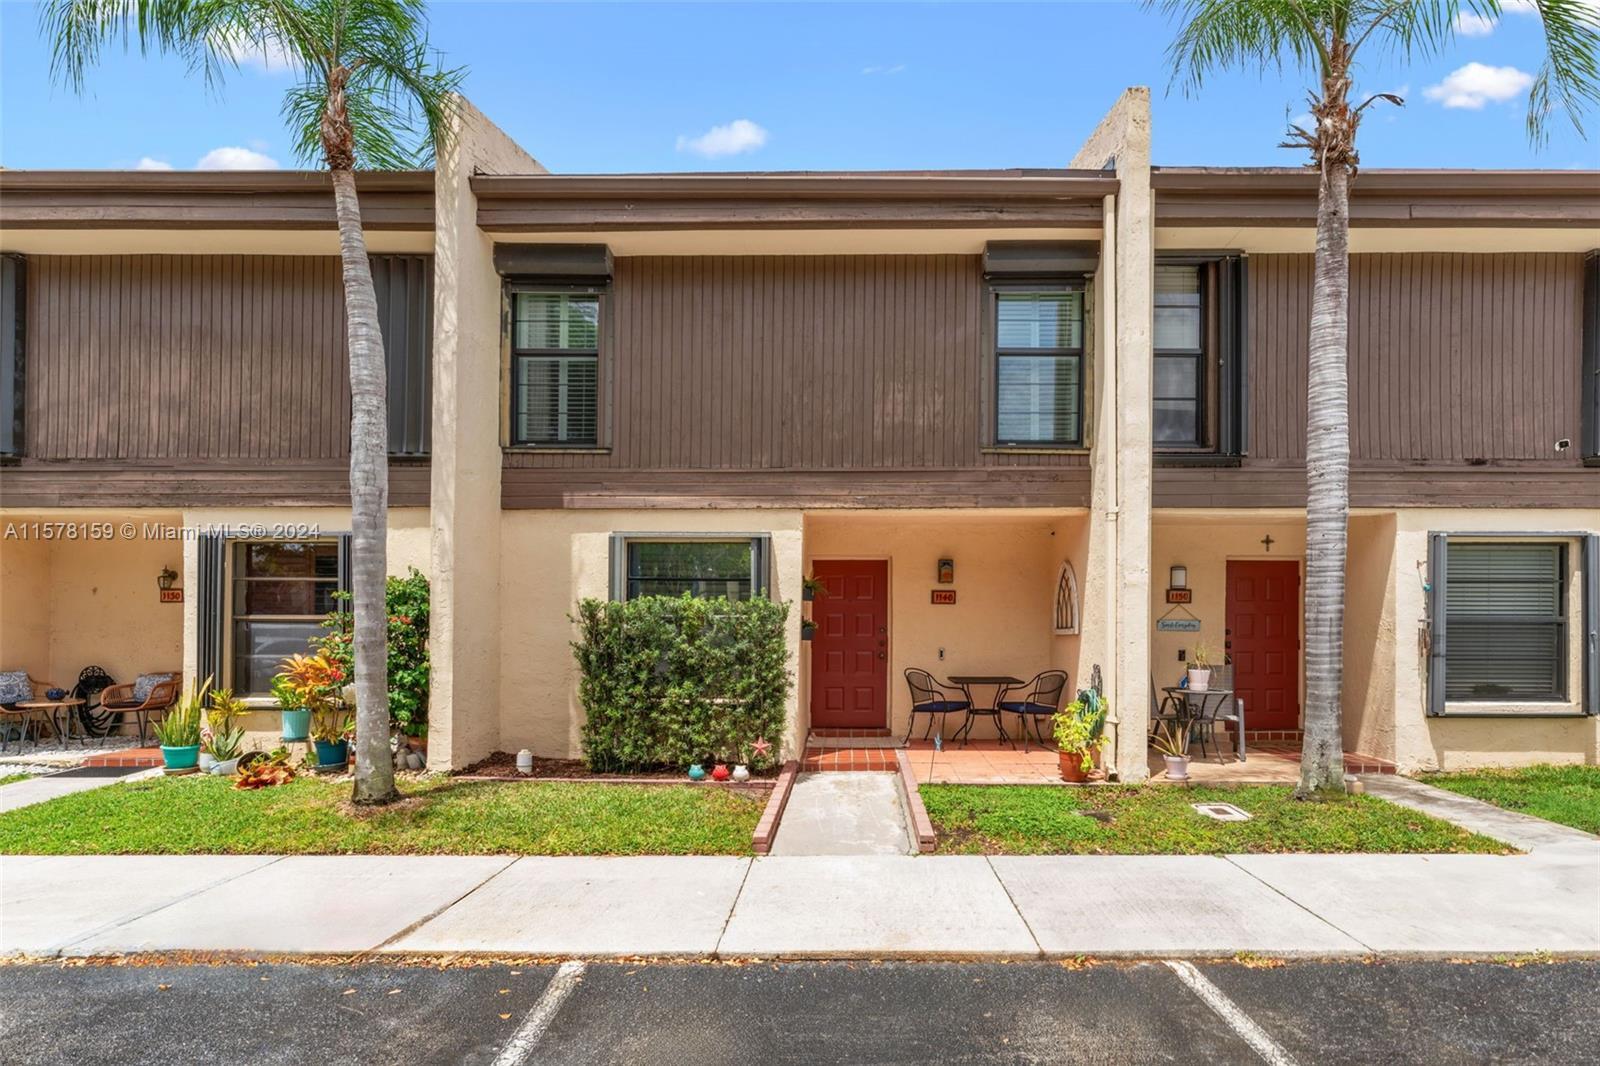 Photo of 1140 NW 99th Ave #70 in Pembroke Pines, FL